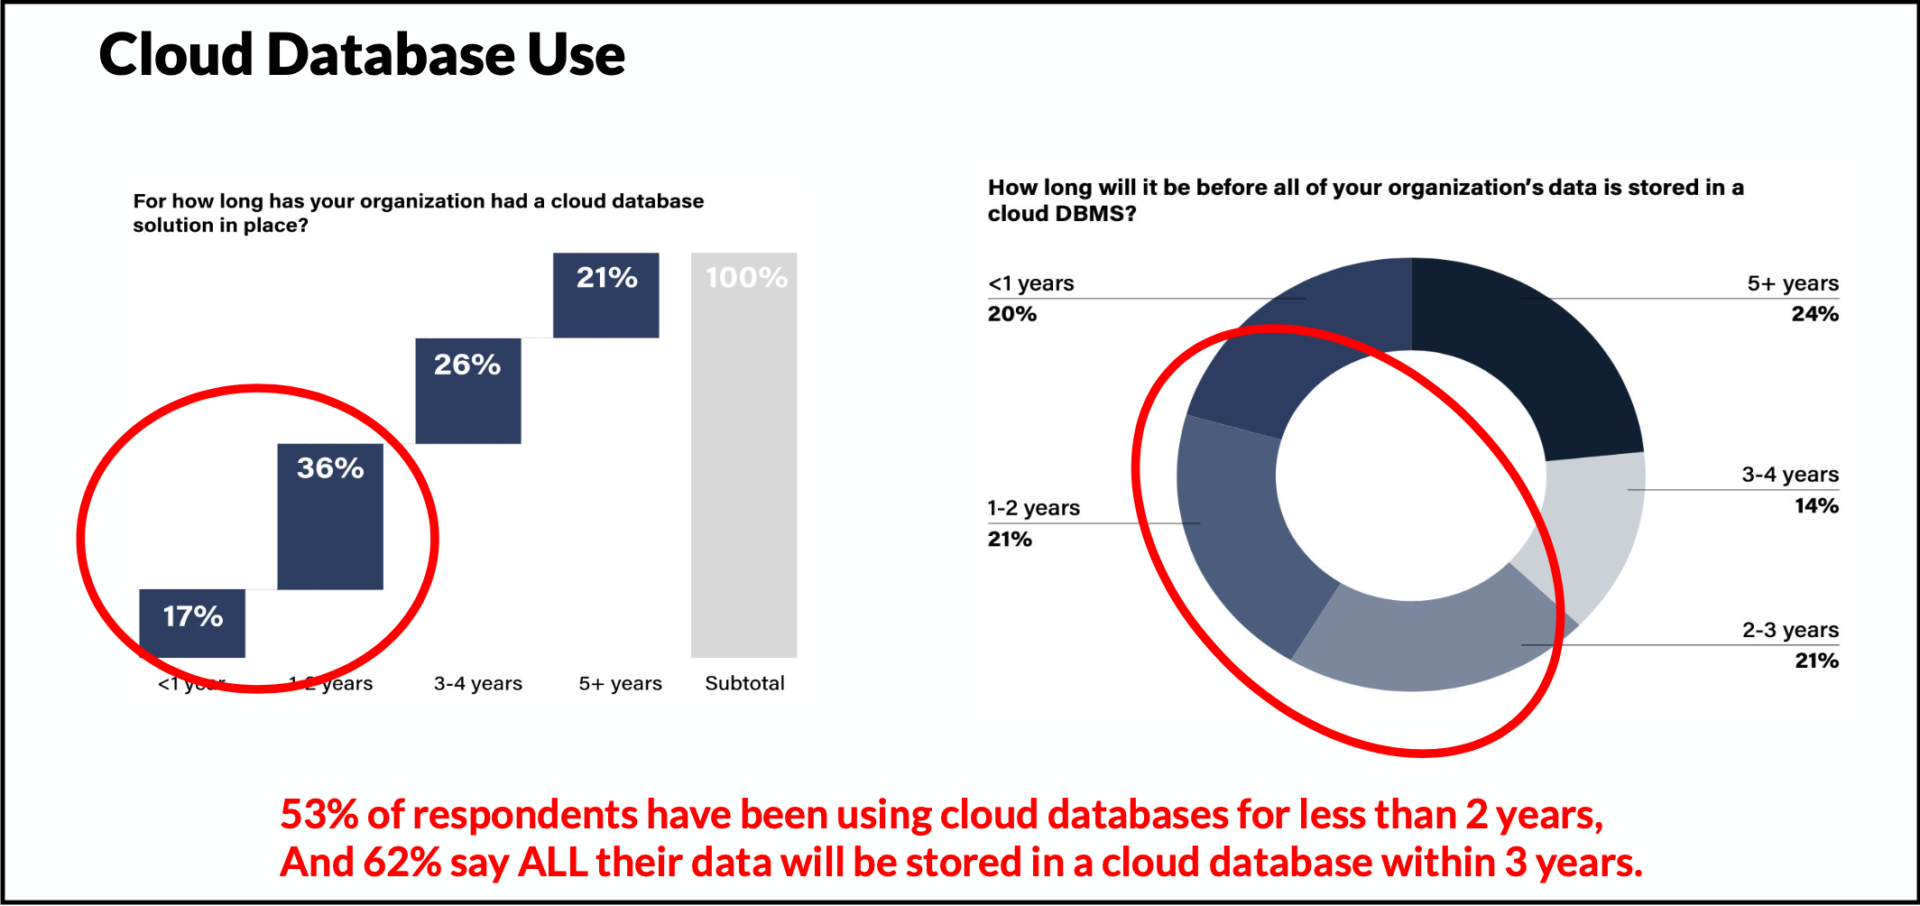 Half of cloud database usage is new, and more than half of respondents say ALL there data will be in the cloud in a few years.